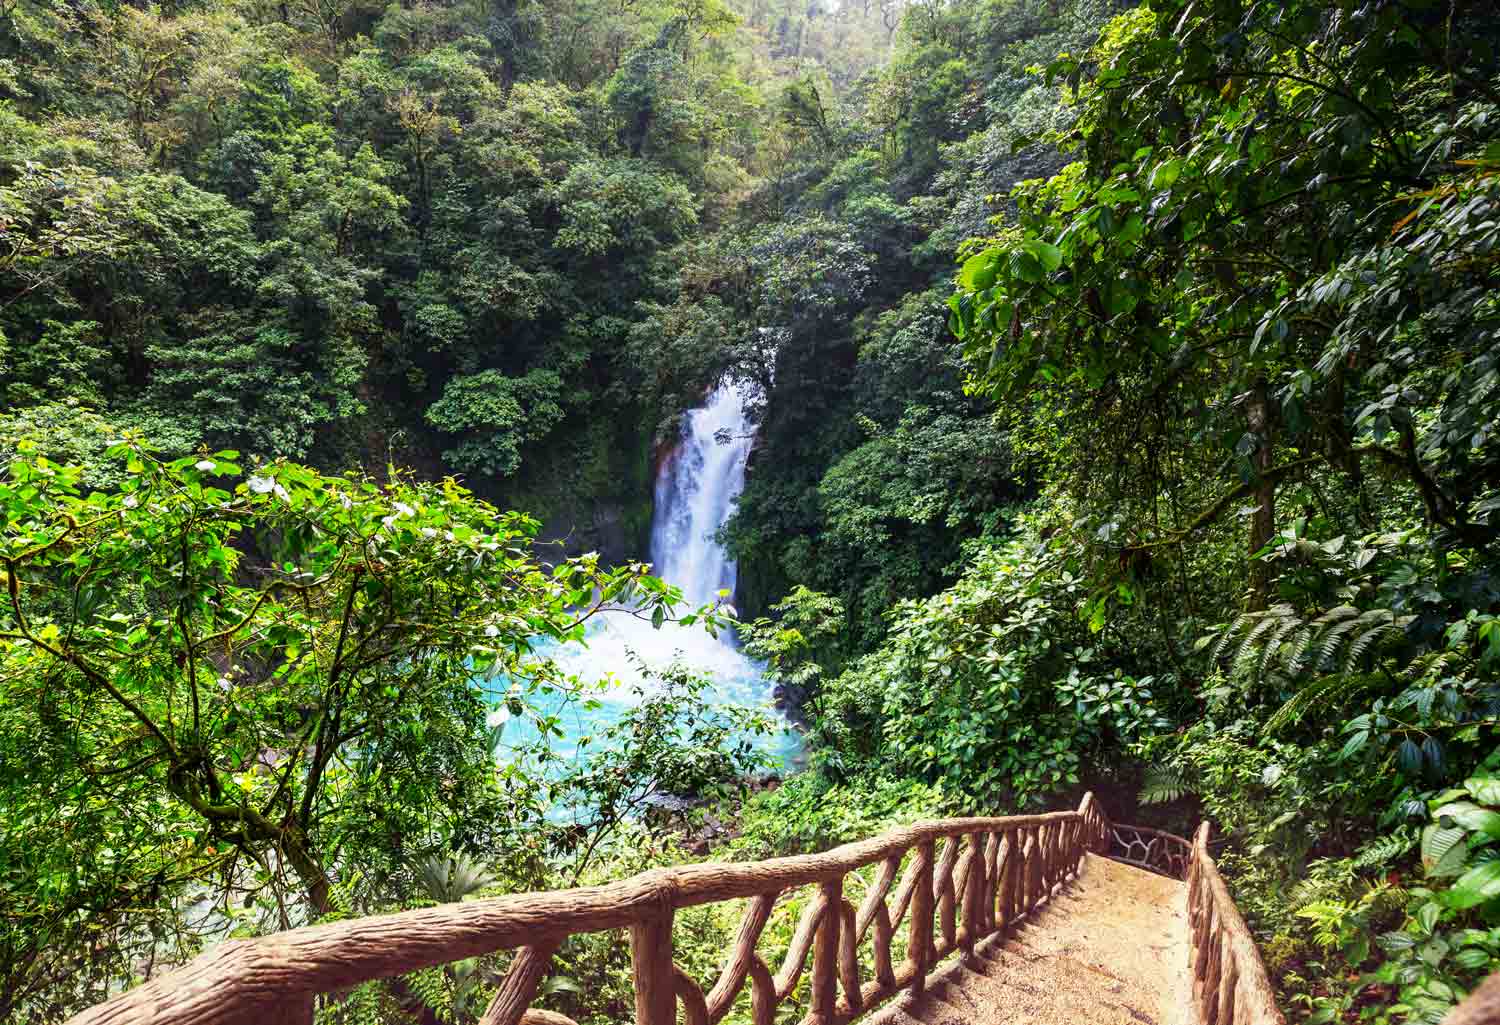 A waterfall in Costa Rica. One of the benefits of a yoga retreat is being immersed in nature